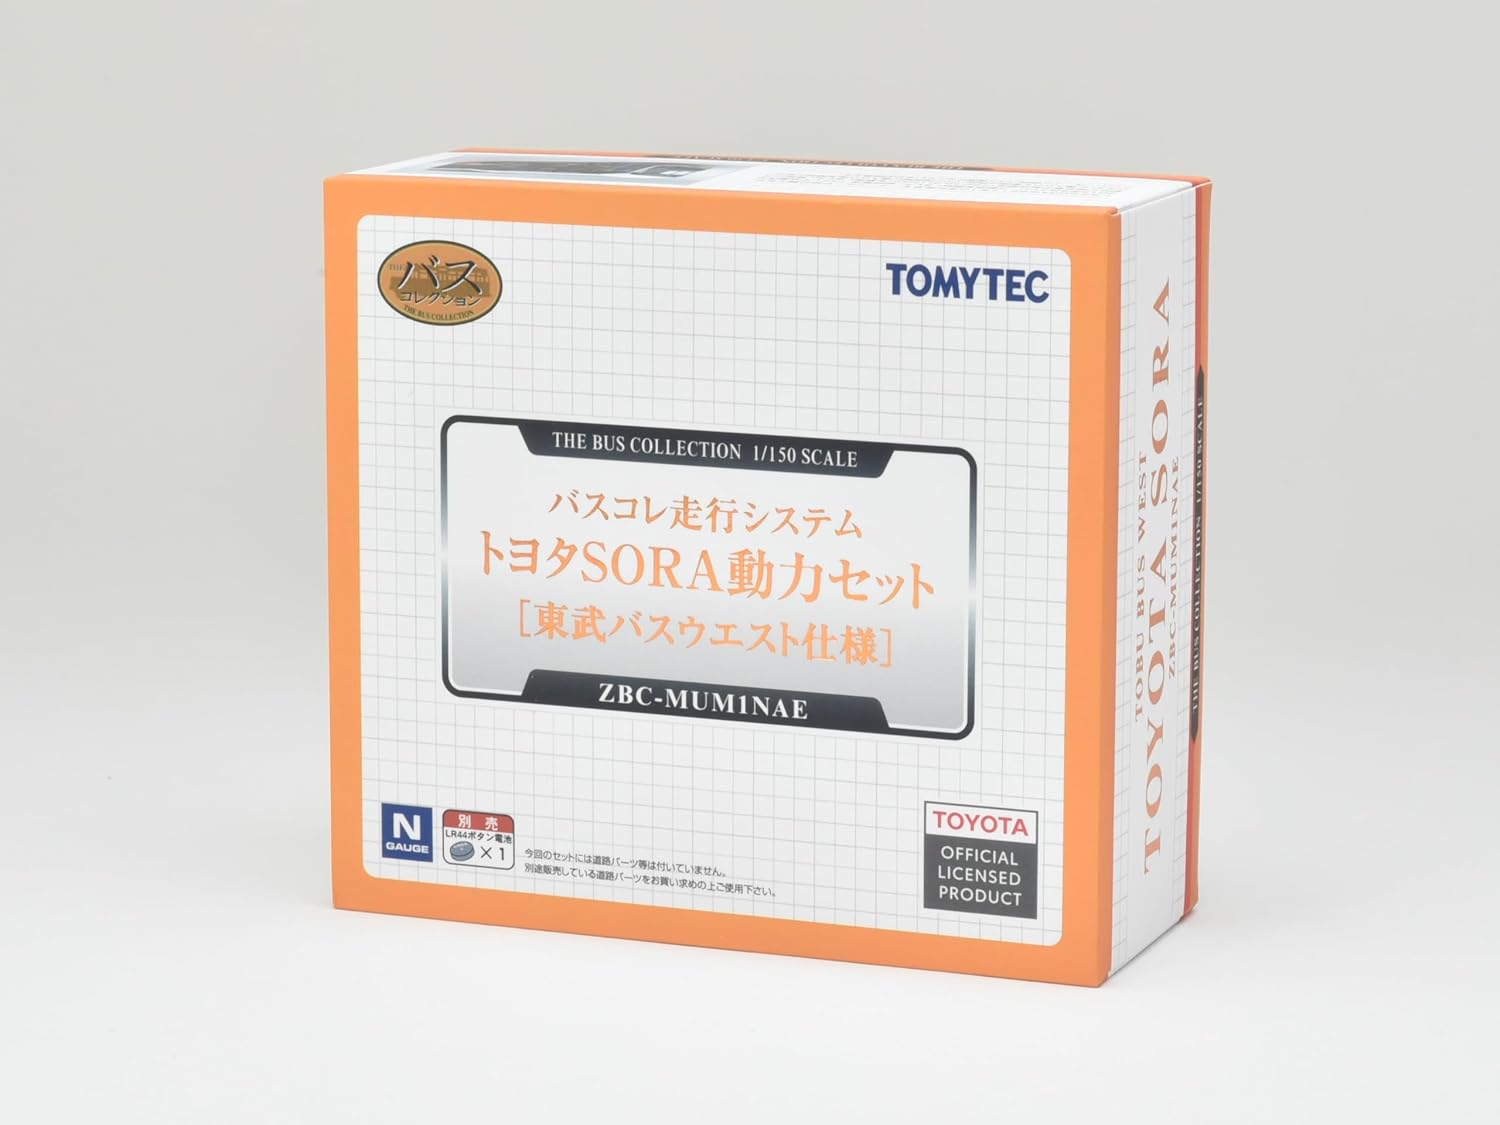 Tomytec The Bus Collection Bus Colle Driving System Toyota SORA Power Set, Tobu Bus Waist Specifications - BanzaiHobby